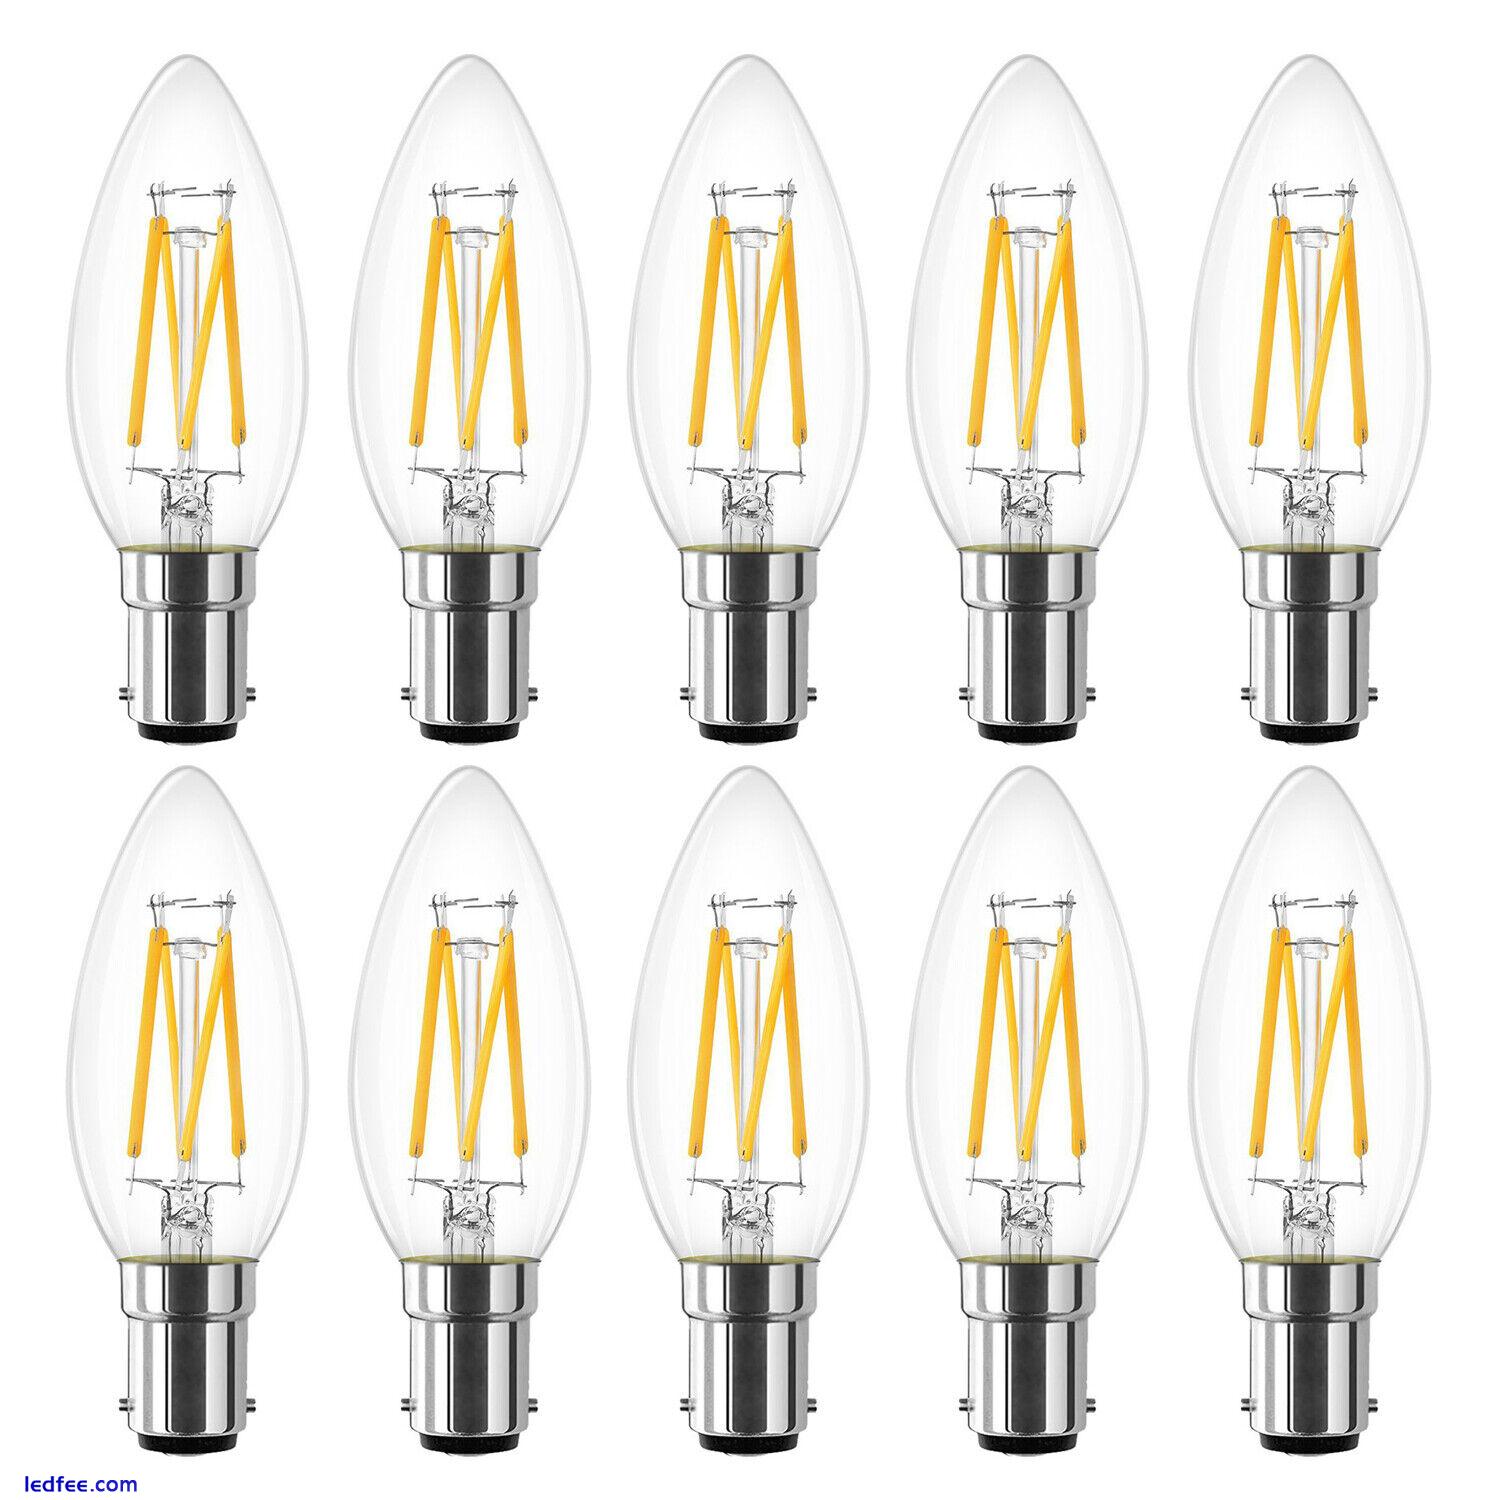 Dimmable 4W B15 Small Bayonet LED Candle Filament Light Bulb Industrial Vintage 4 